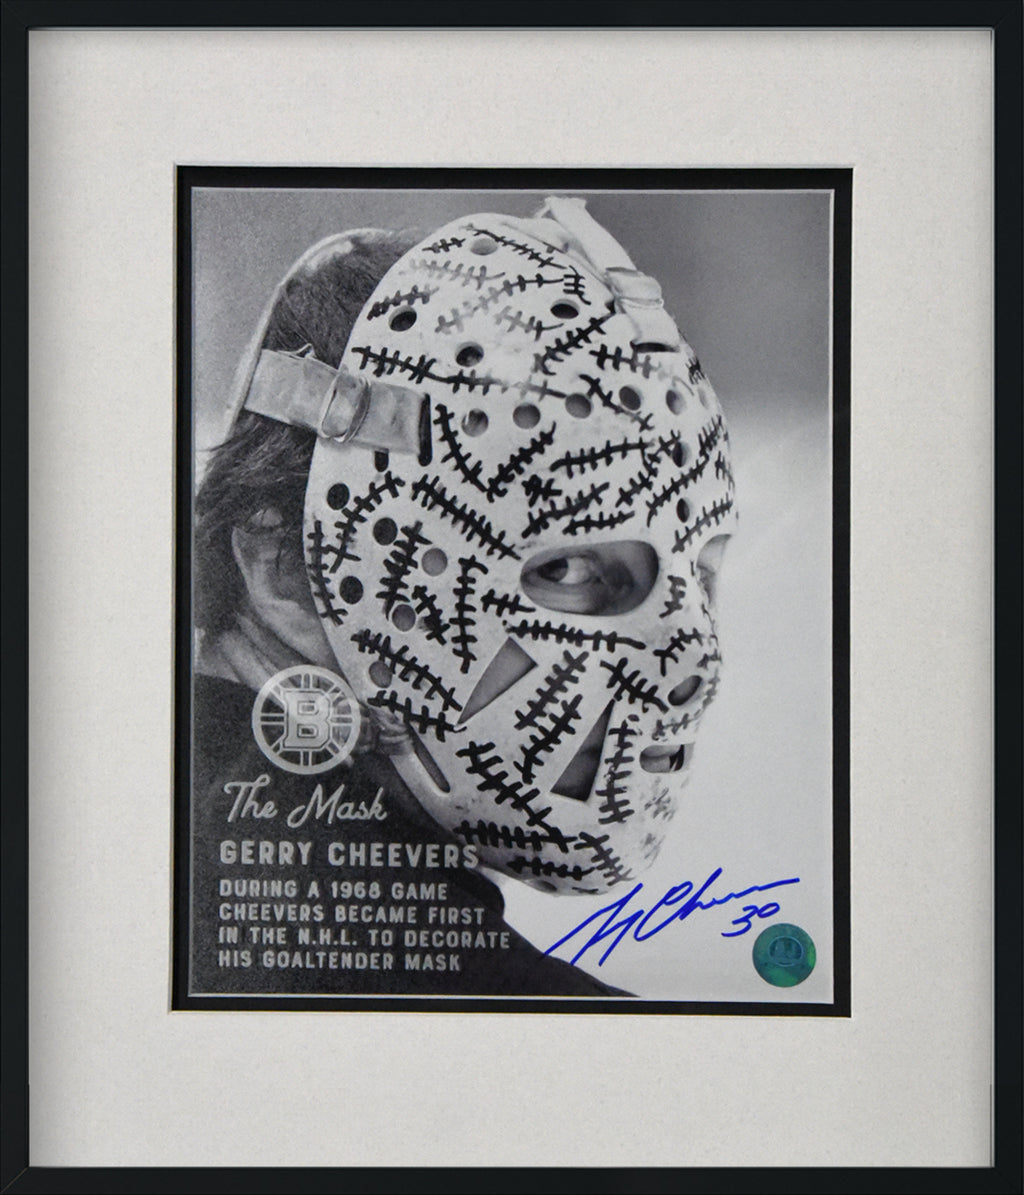 Gerry Cheevers Autograph Photo The Mask 11x14